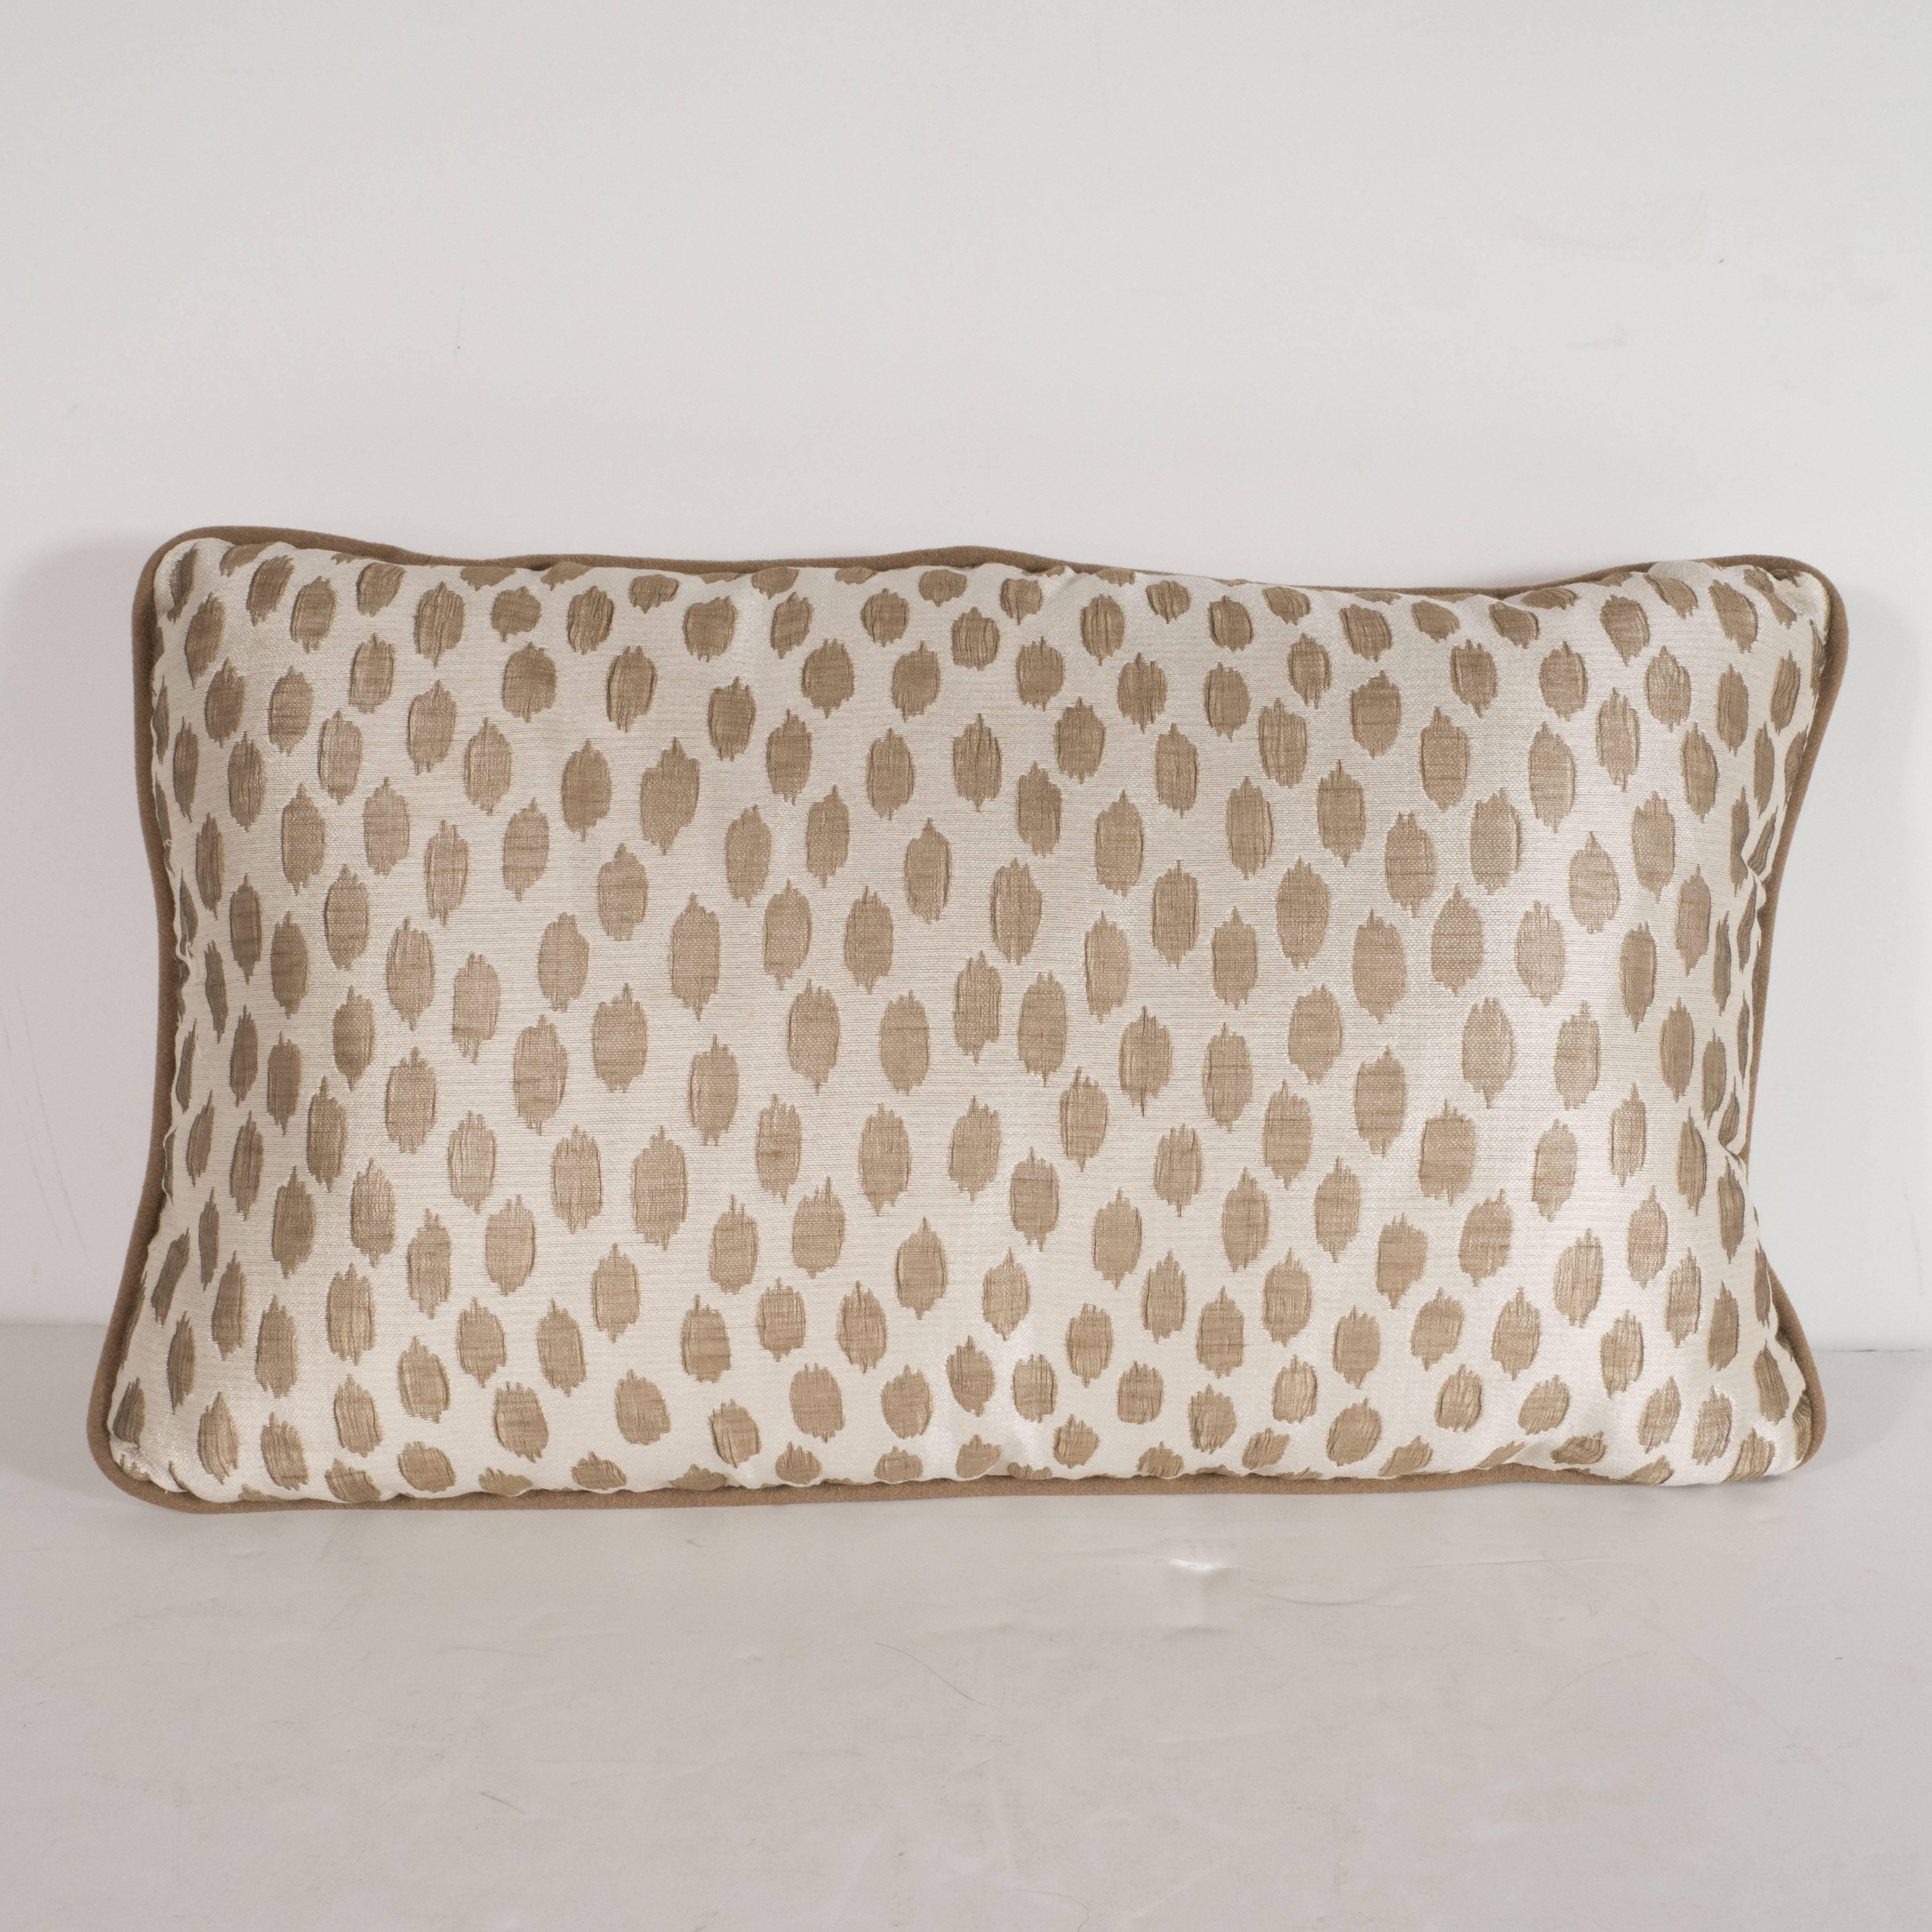 This elegant modernist pillow features organic forms in muted gold hue- with piping in a matching tone- that float against an ecru background with a horizontal weave. With its austere form and sophisticated fabric, this pillow would be a winning